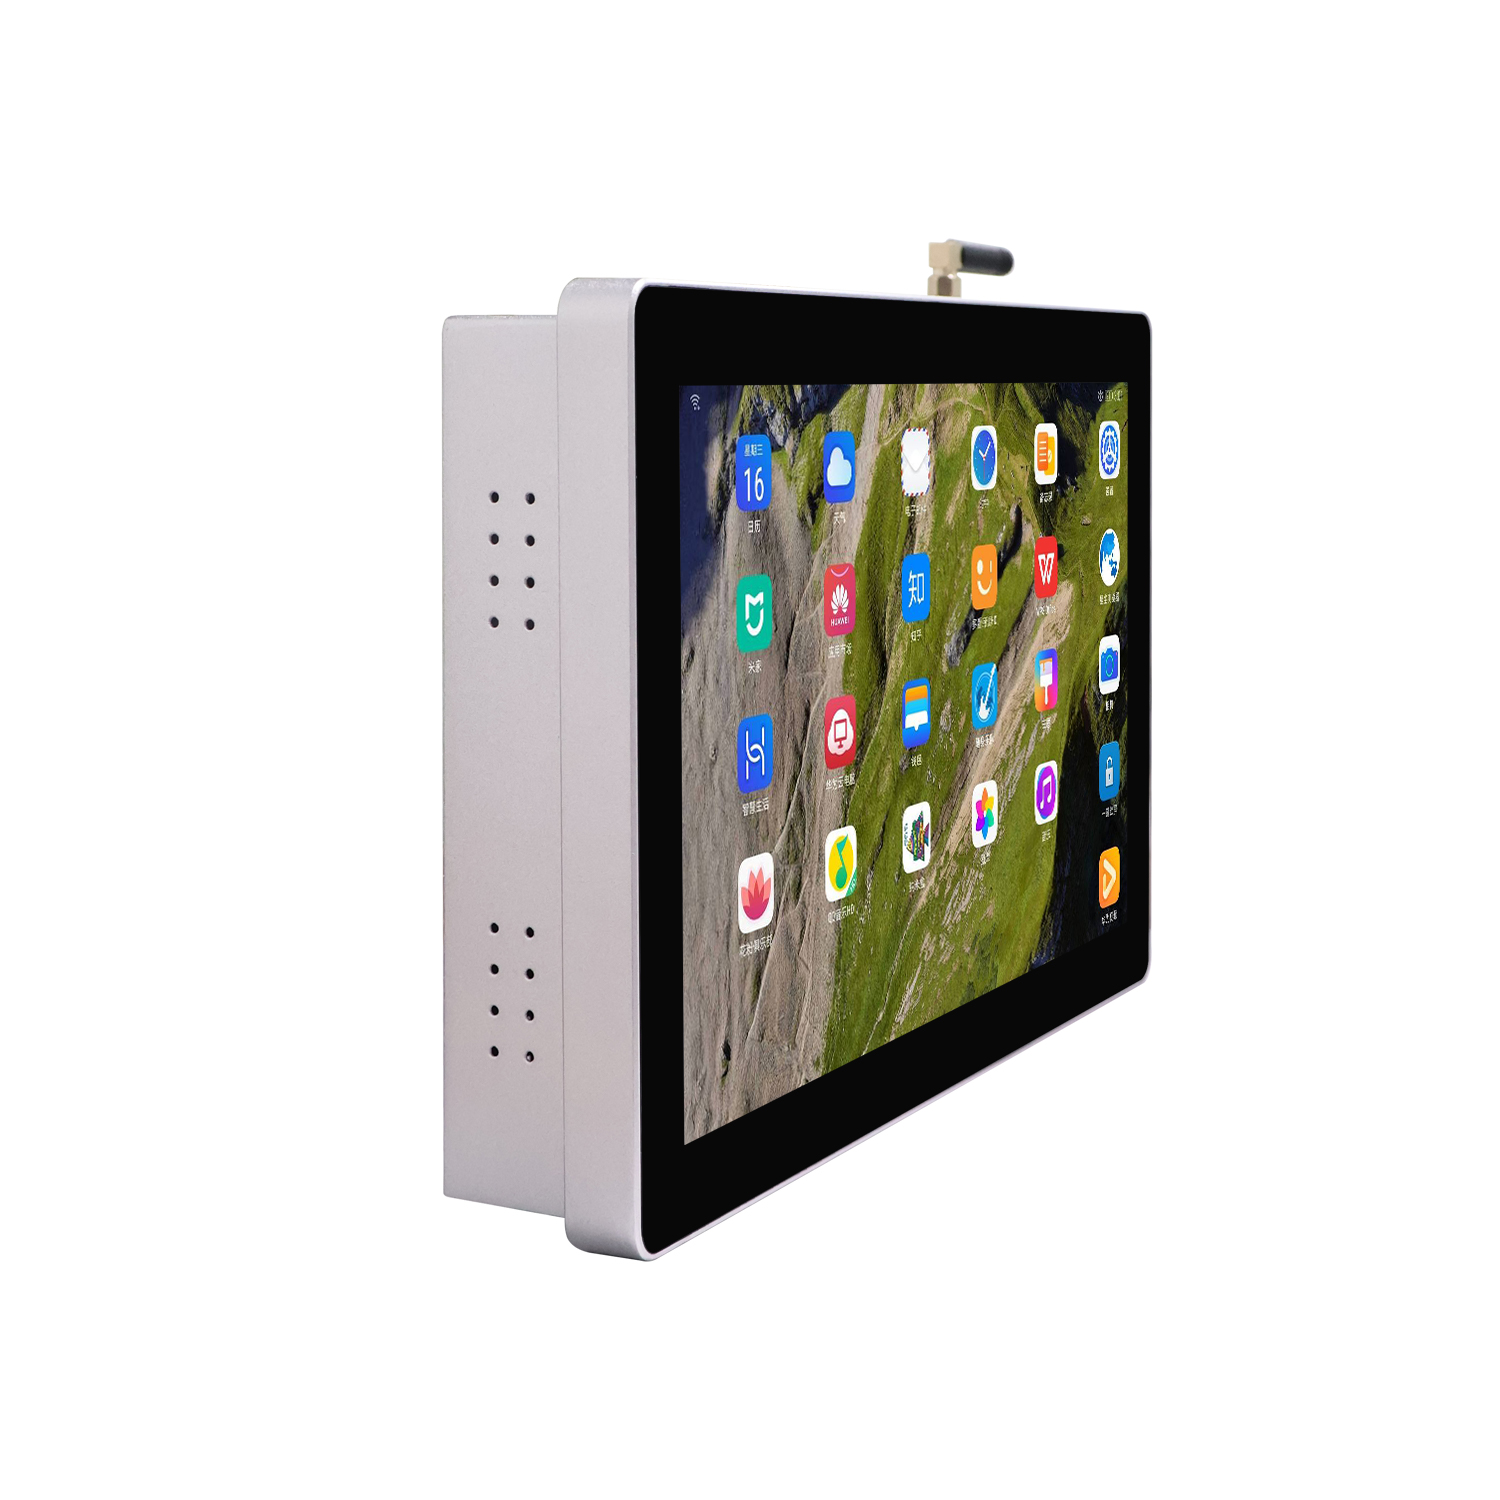 15.6 inch wall mounted android industrial panel pc with touchscreen monitor Featured Image